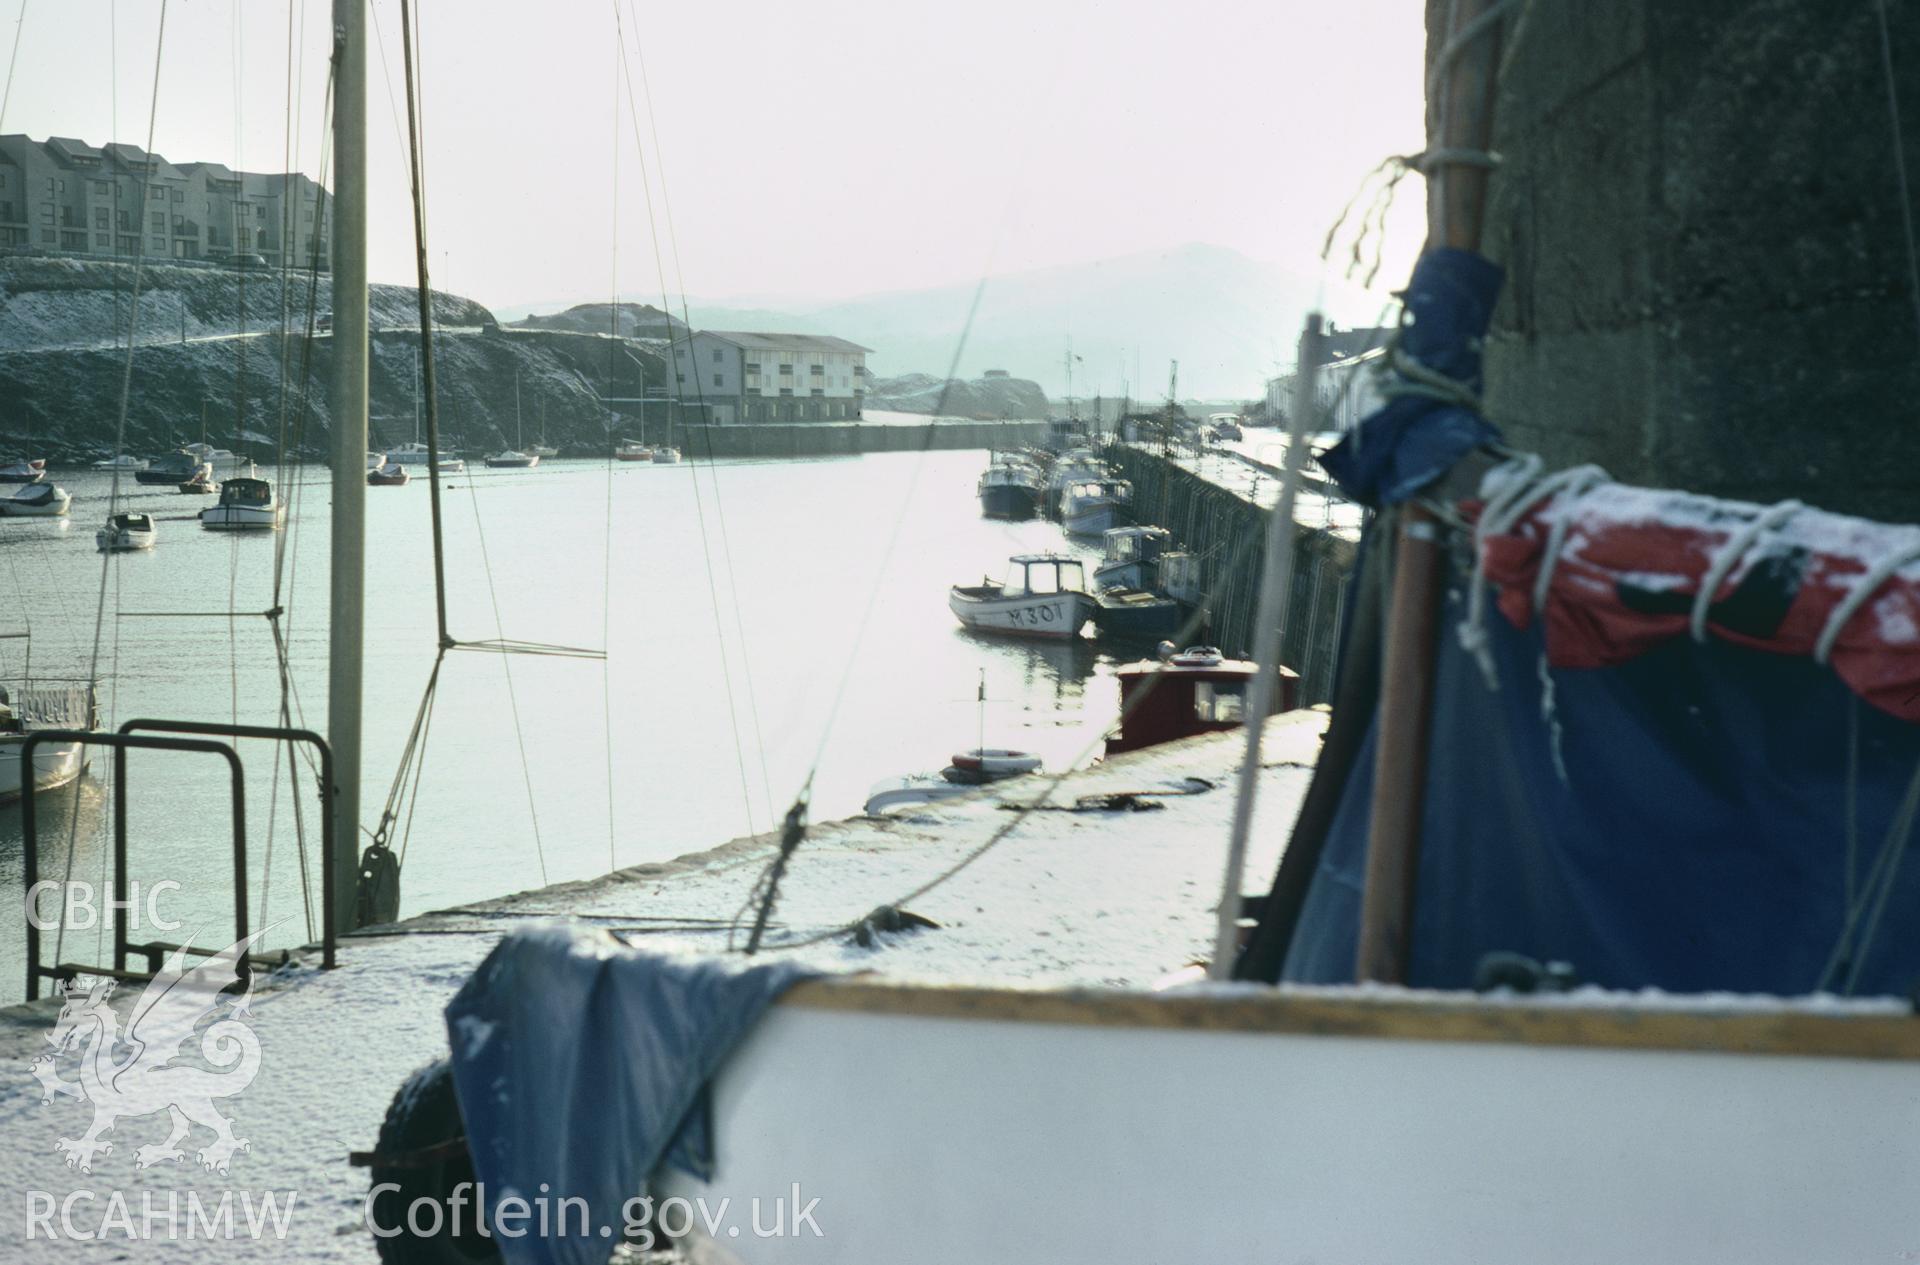 35mm colour slide showing Aberystwyth Harbour, Cardiganshire by Dylan Roberts.